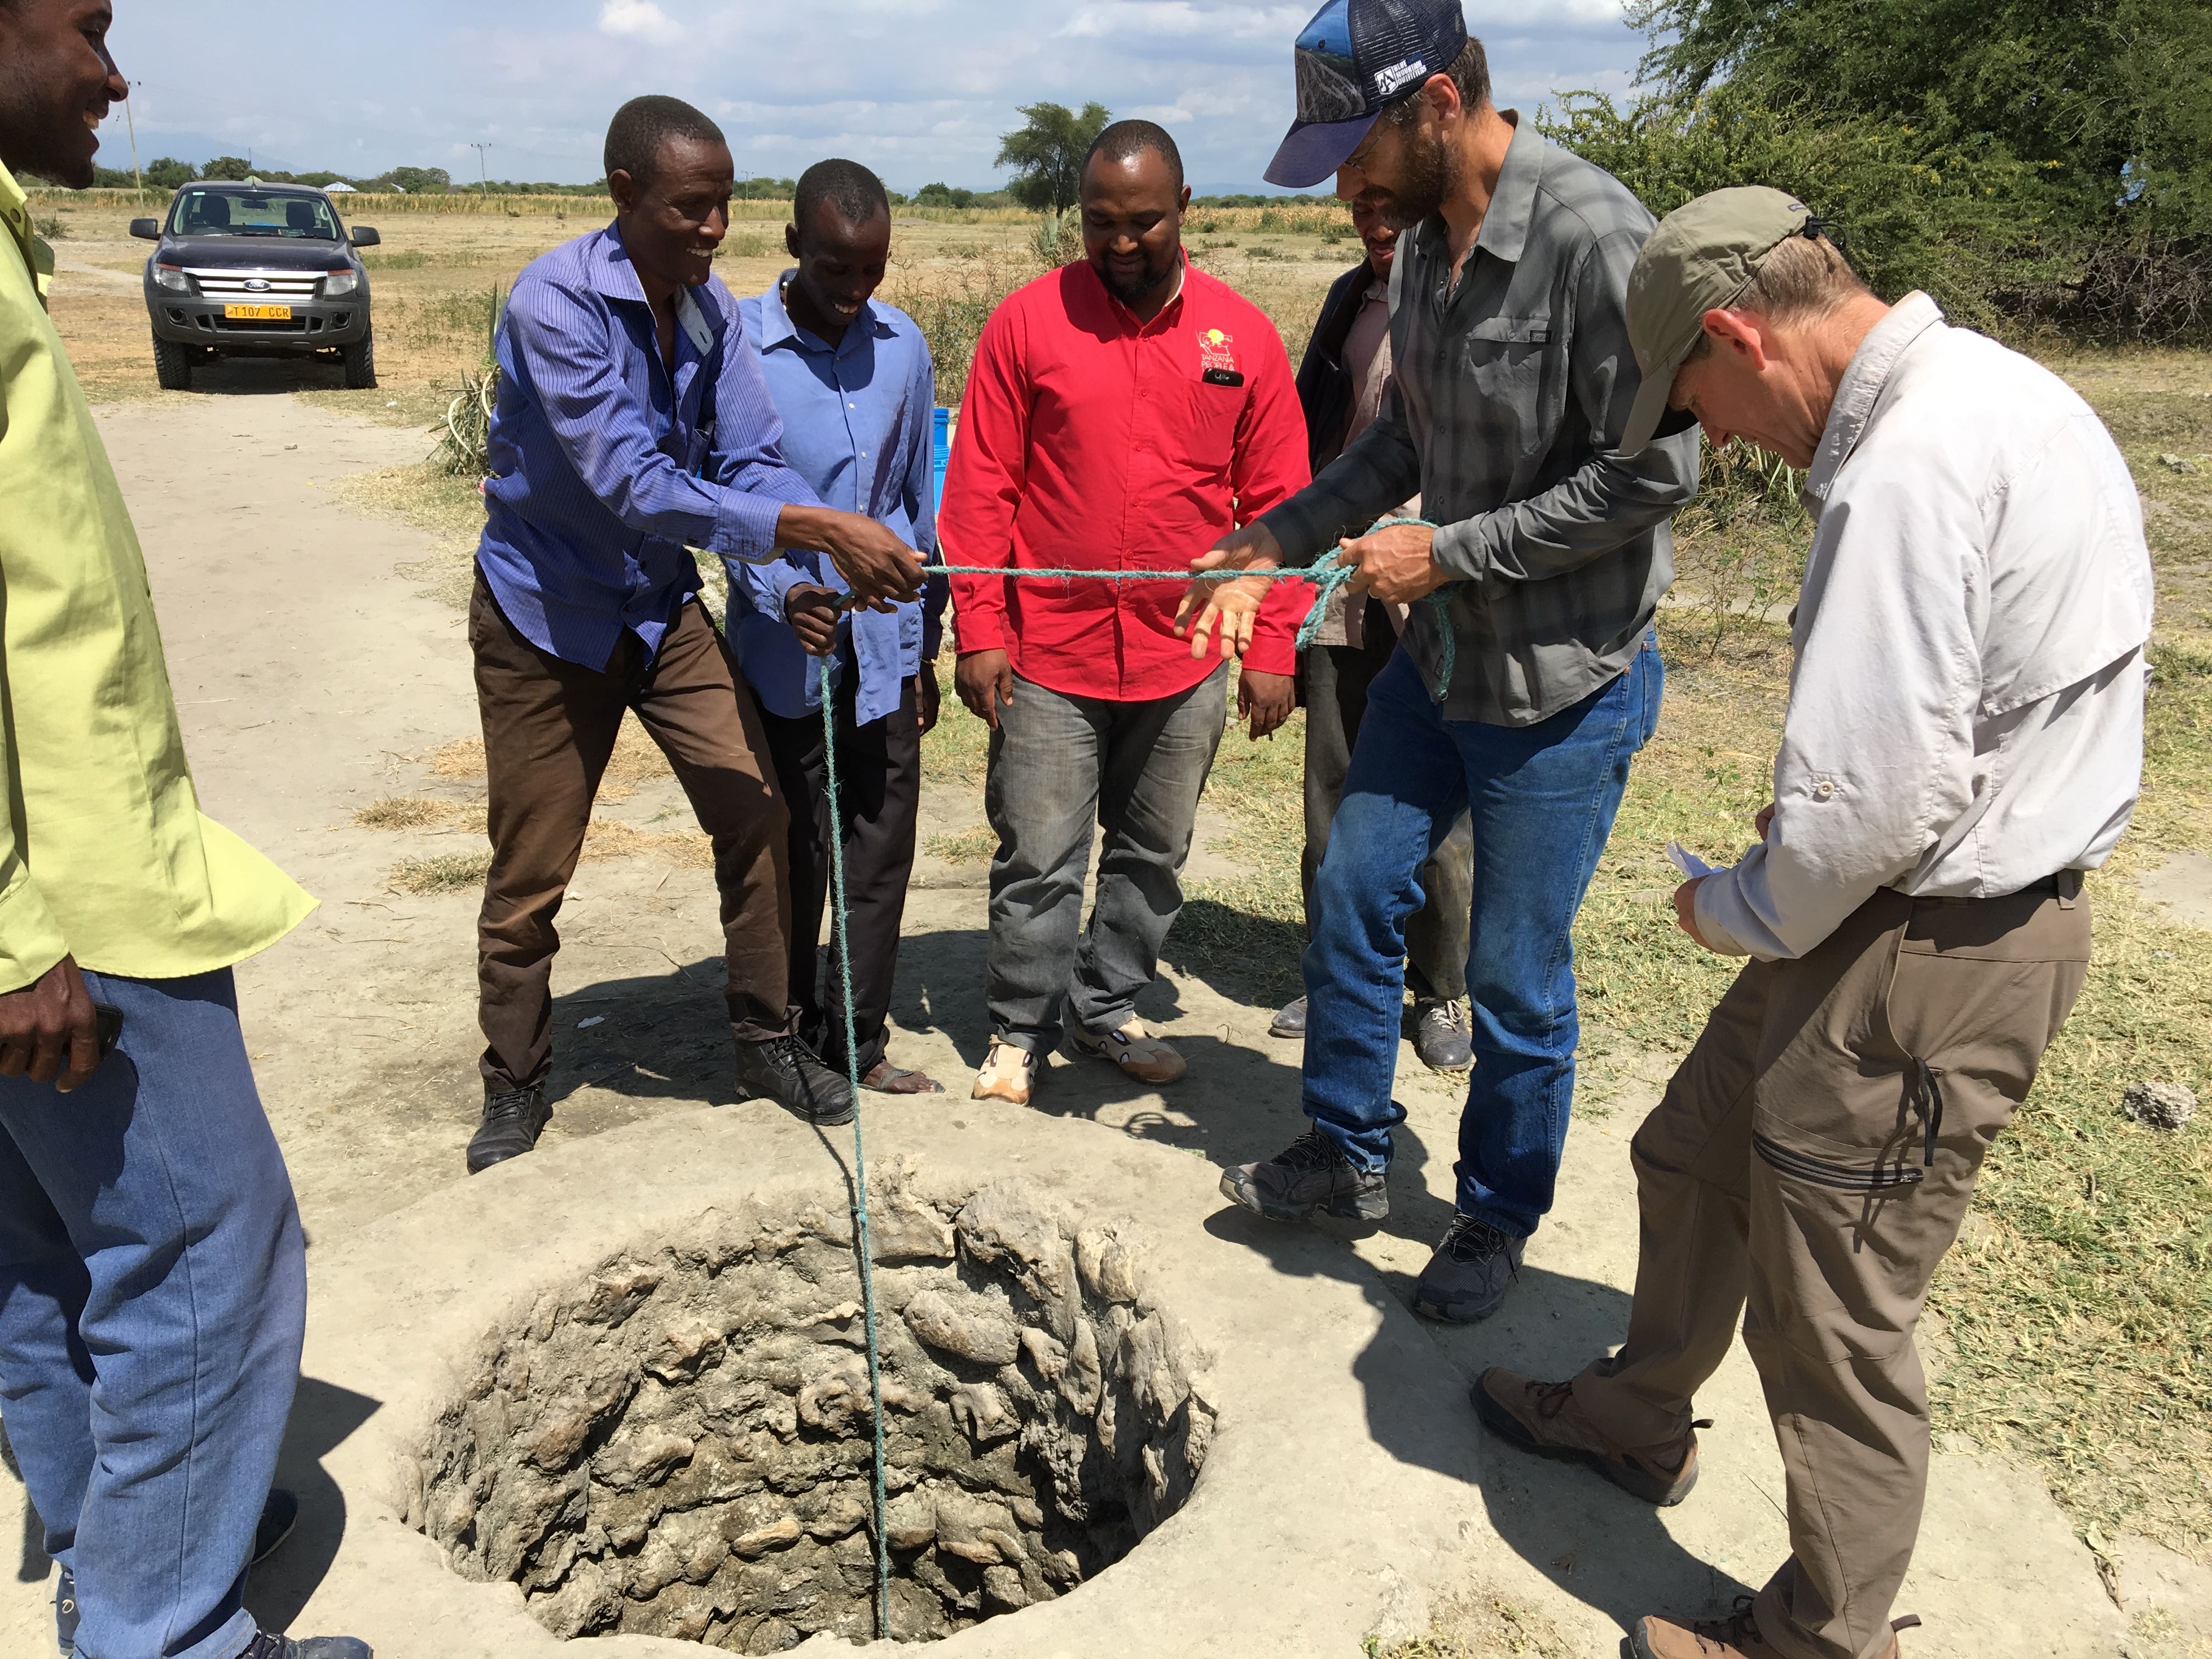 U.S. Forest Service technical specialists Dale Higgins (right) and Aric Johnson (second from right) investigate a well alongside community representatives in northern Tanzania as part of an effort to improve hydrological and rangeland management alongside the NGO Tanzania People & Wildlife. Credit: John Kerkering